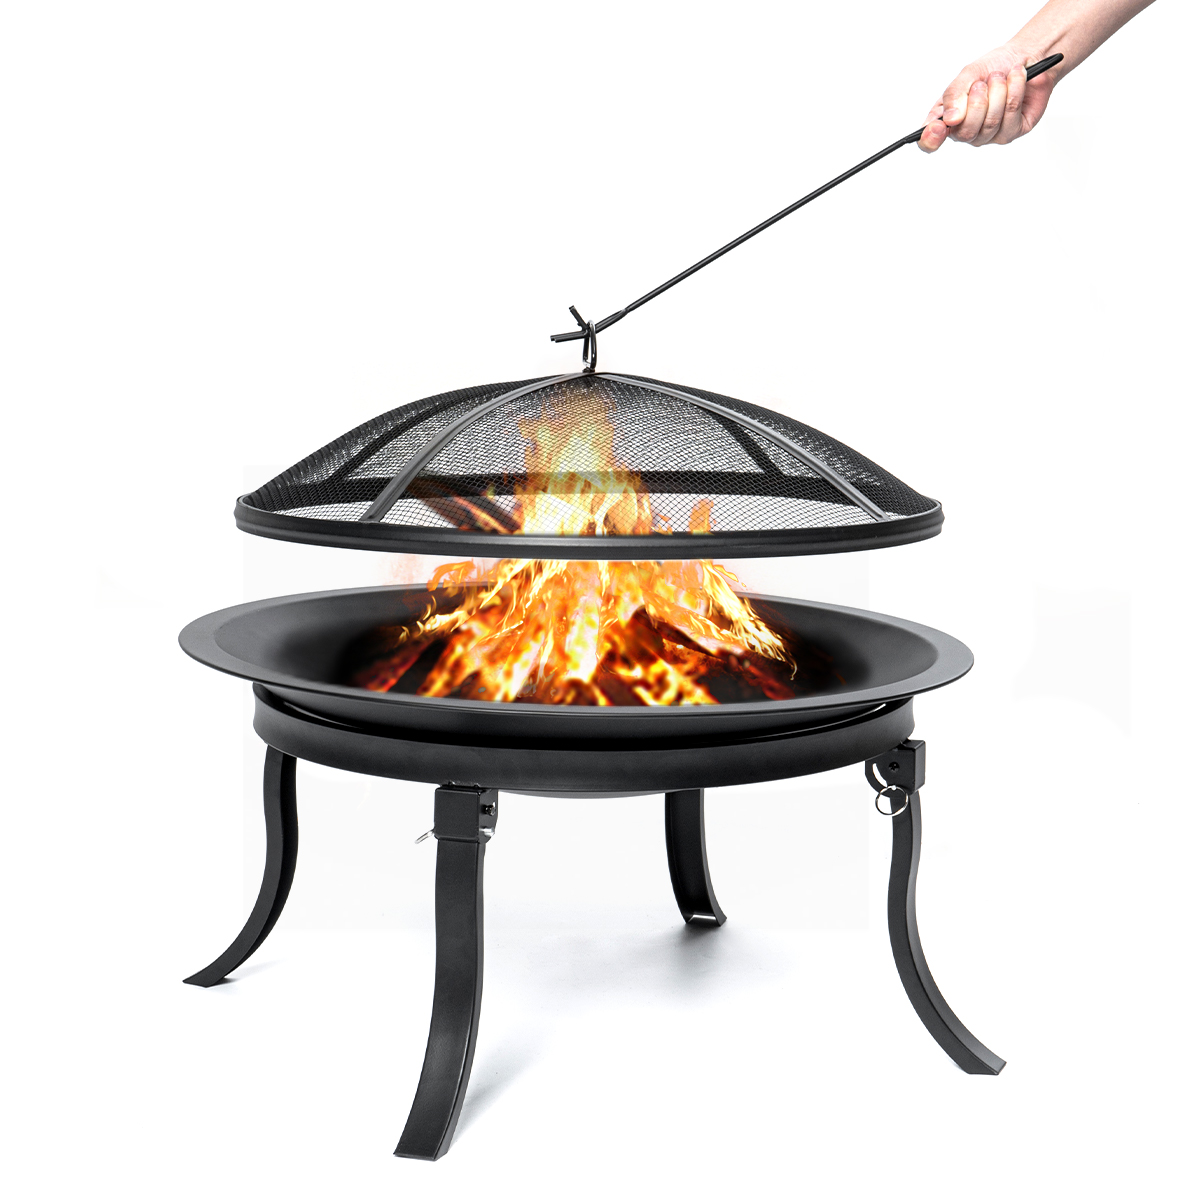 KingSo-24inch-Portable-Fire-Pits-Steel-Wood-Burning-Firepit--with-BBQ-Grill-Fire-Bowl-Poker-1886879-8